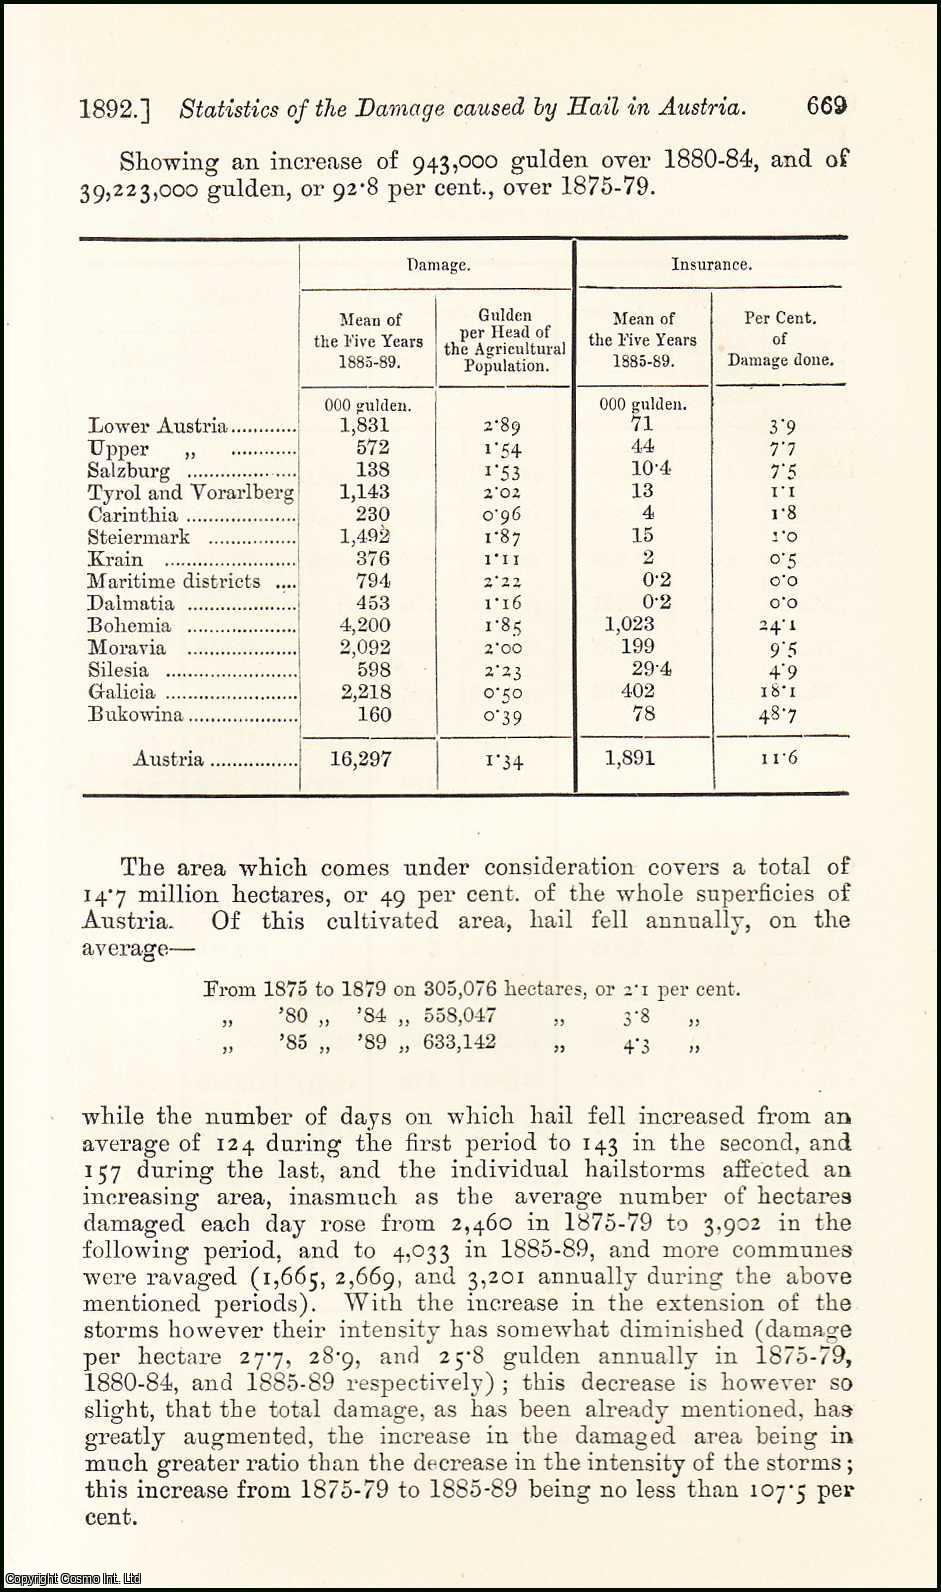 No Author Stated - Statistics of the Damage Caused by Hail in Austria. An uncommon original article from the Journal of the Royal Statistical Society of London, 1892.